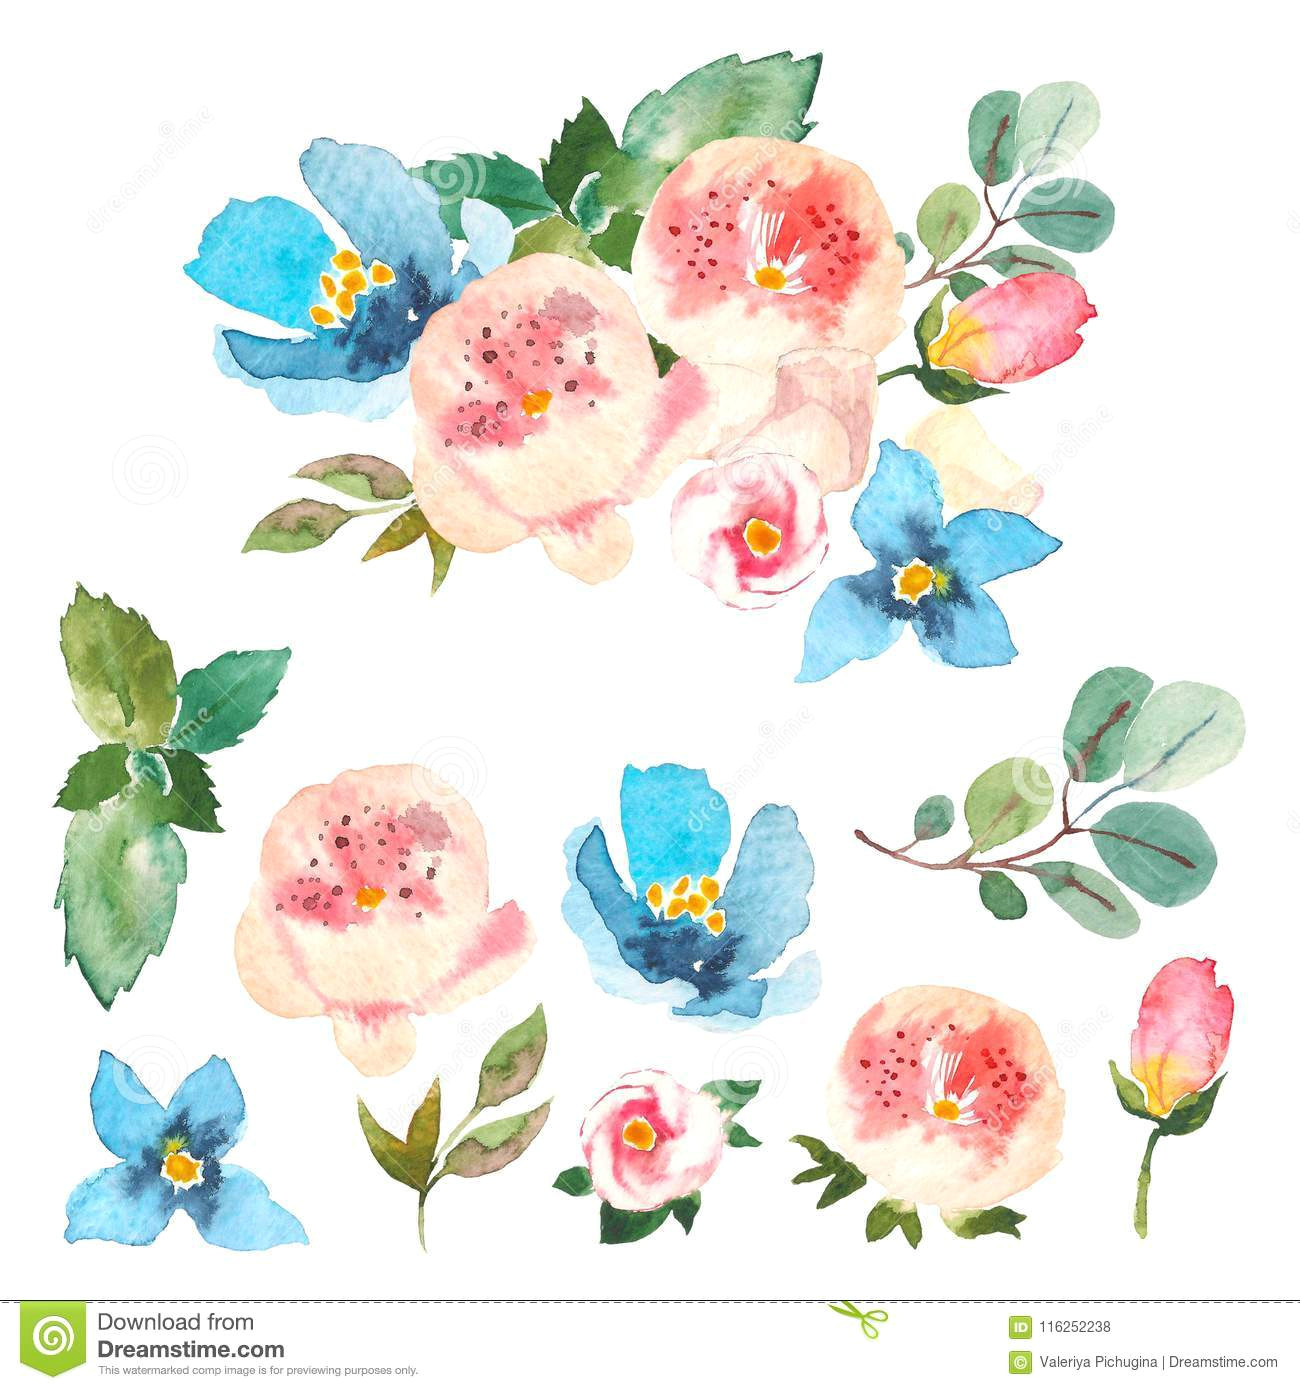 Drawing A Bunch Of Flowers Watercolor Floral Set Colorful Floral Collection with Leaves and